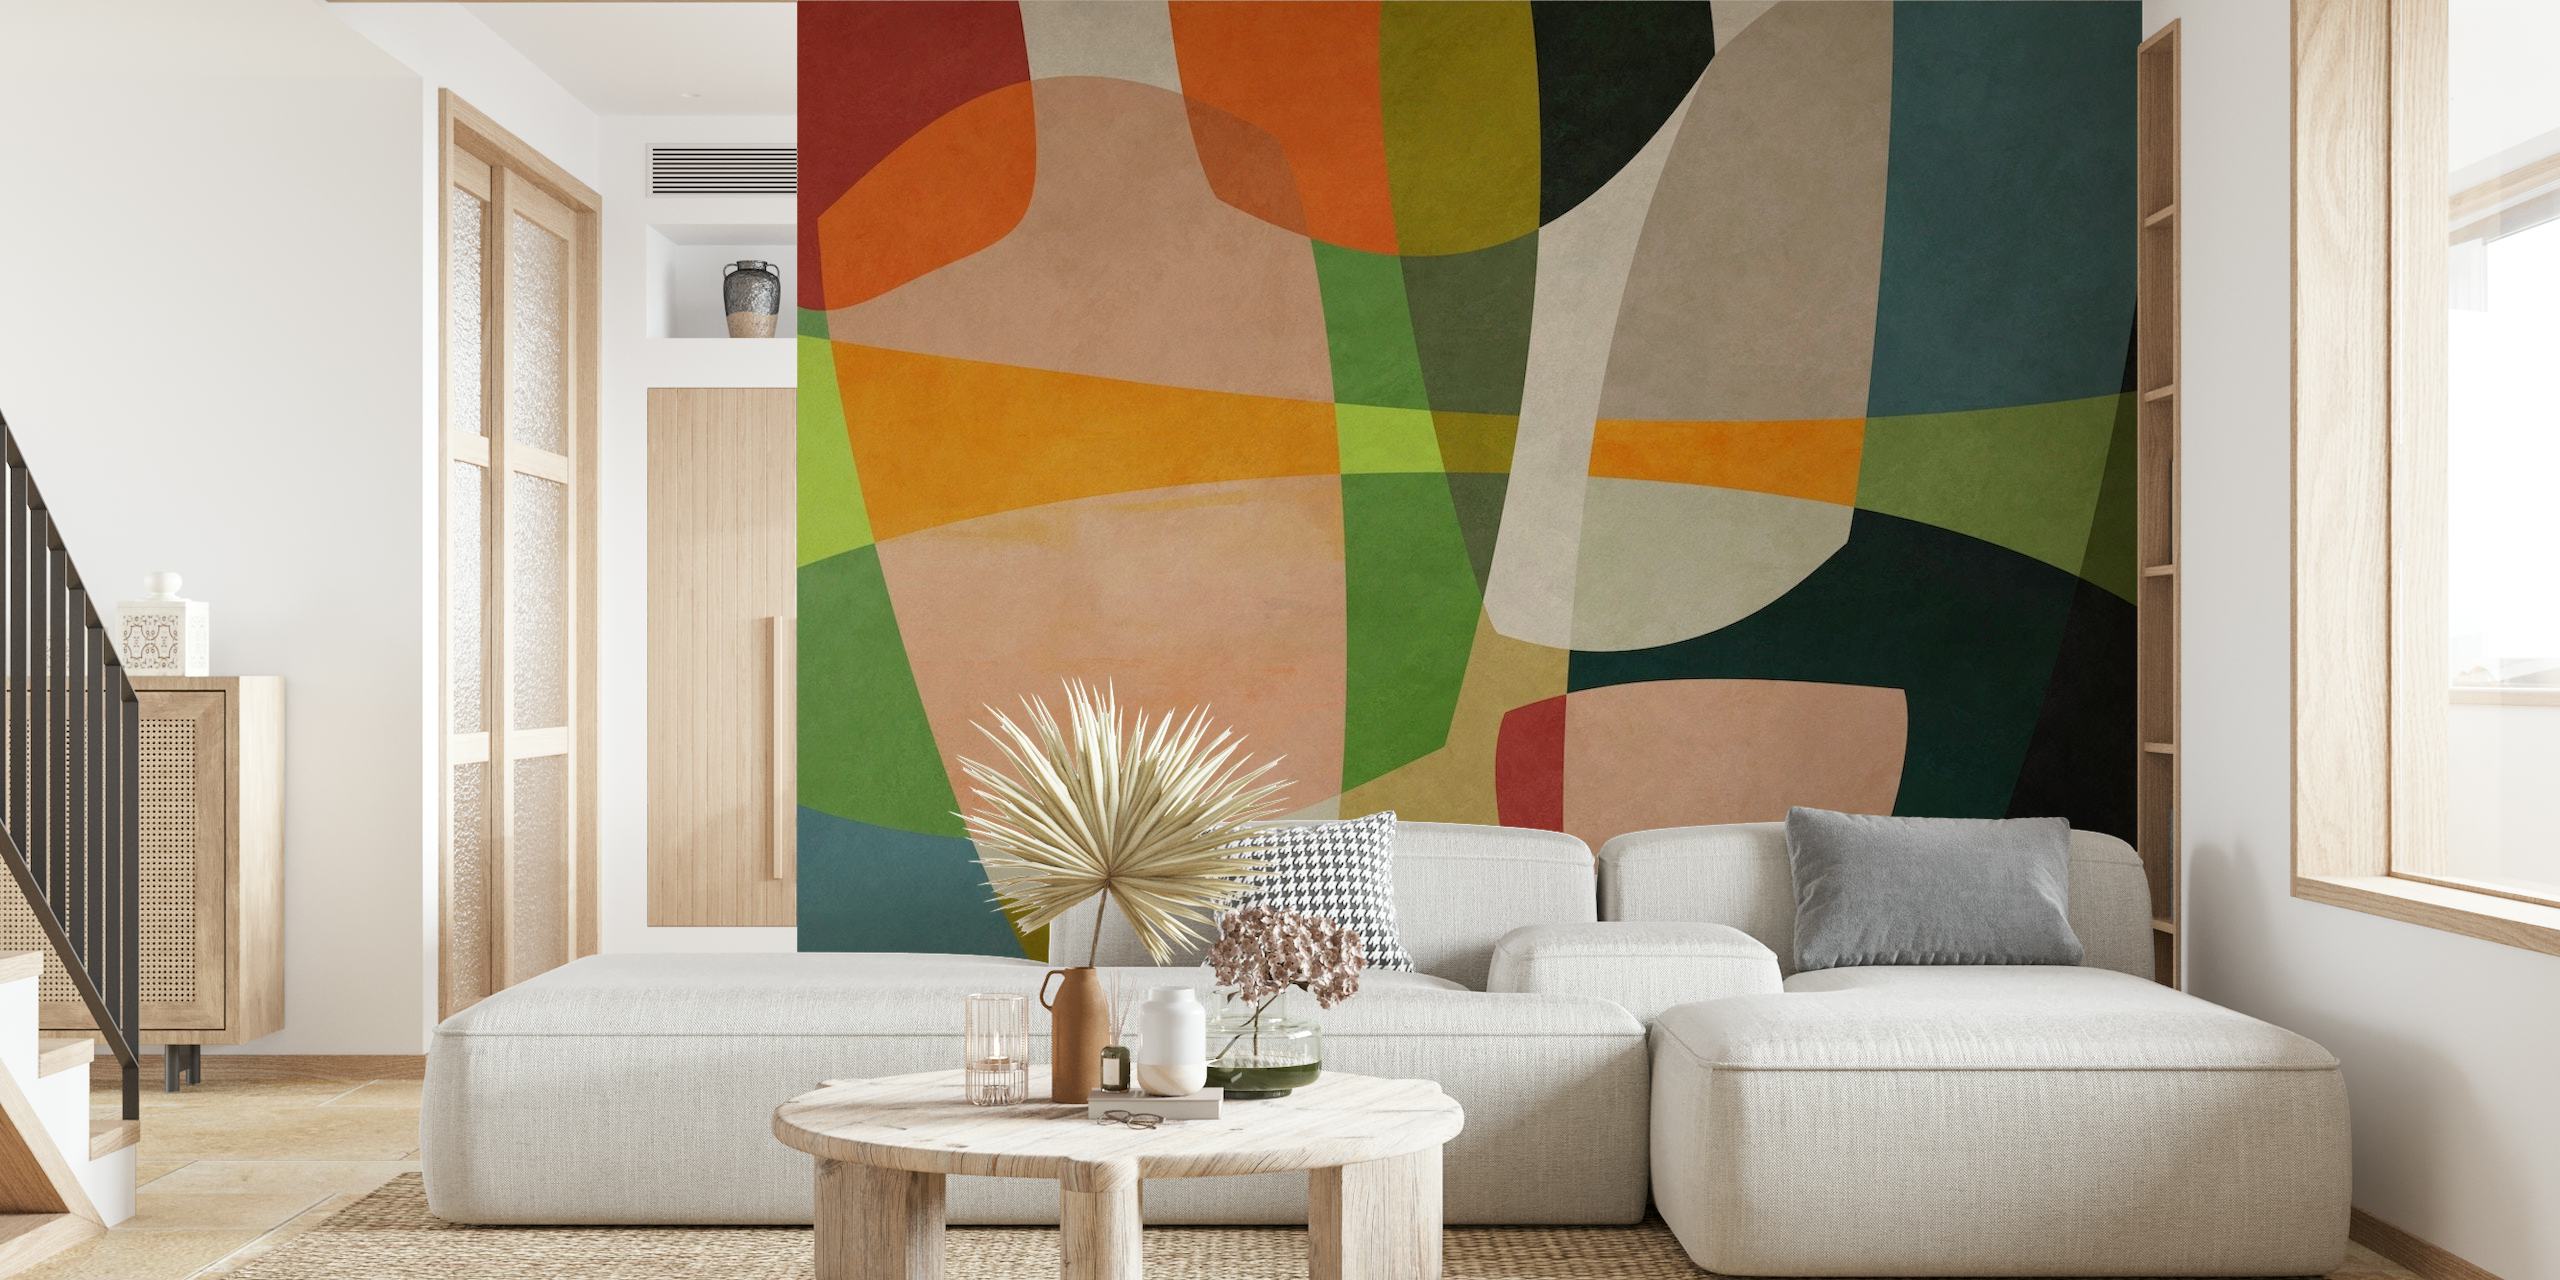 Colorful abstract geometric shapes wall mural